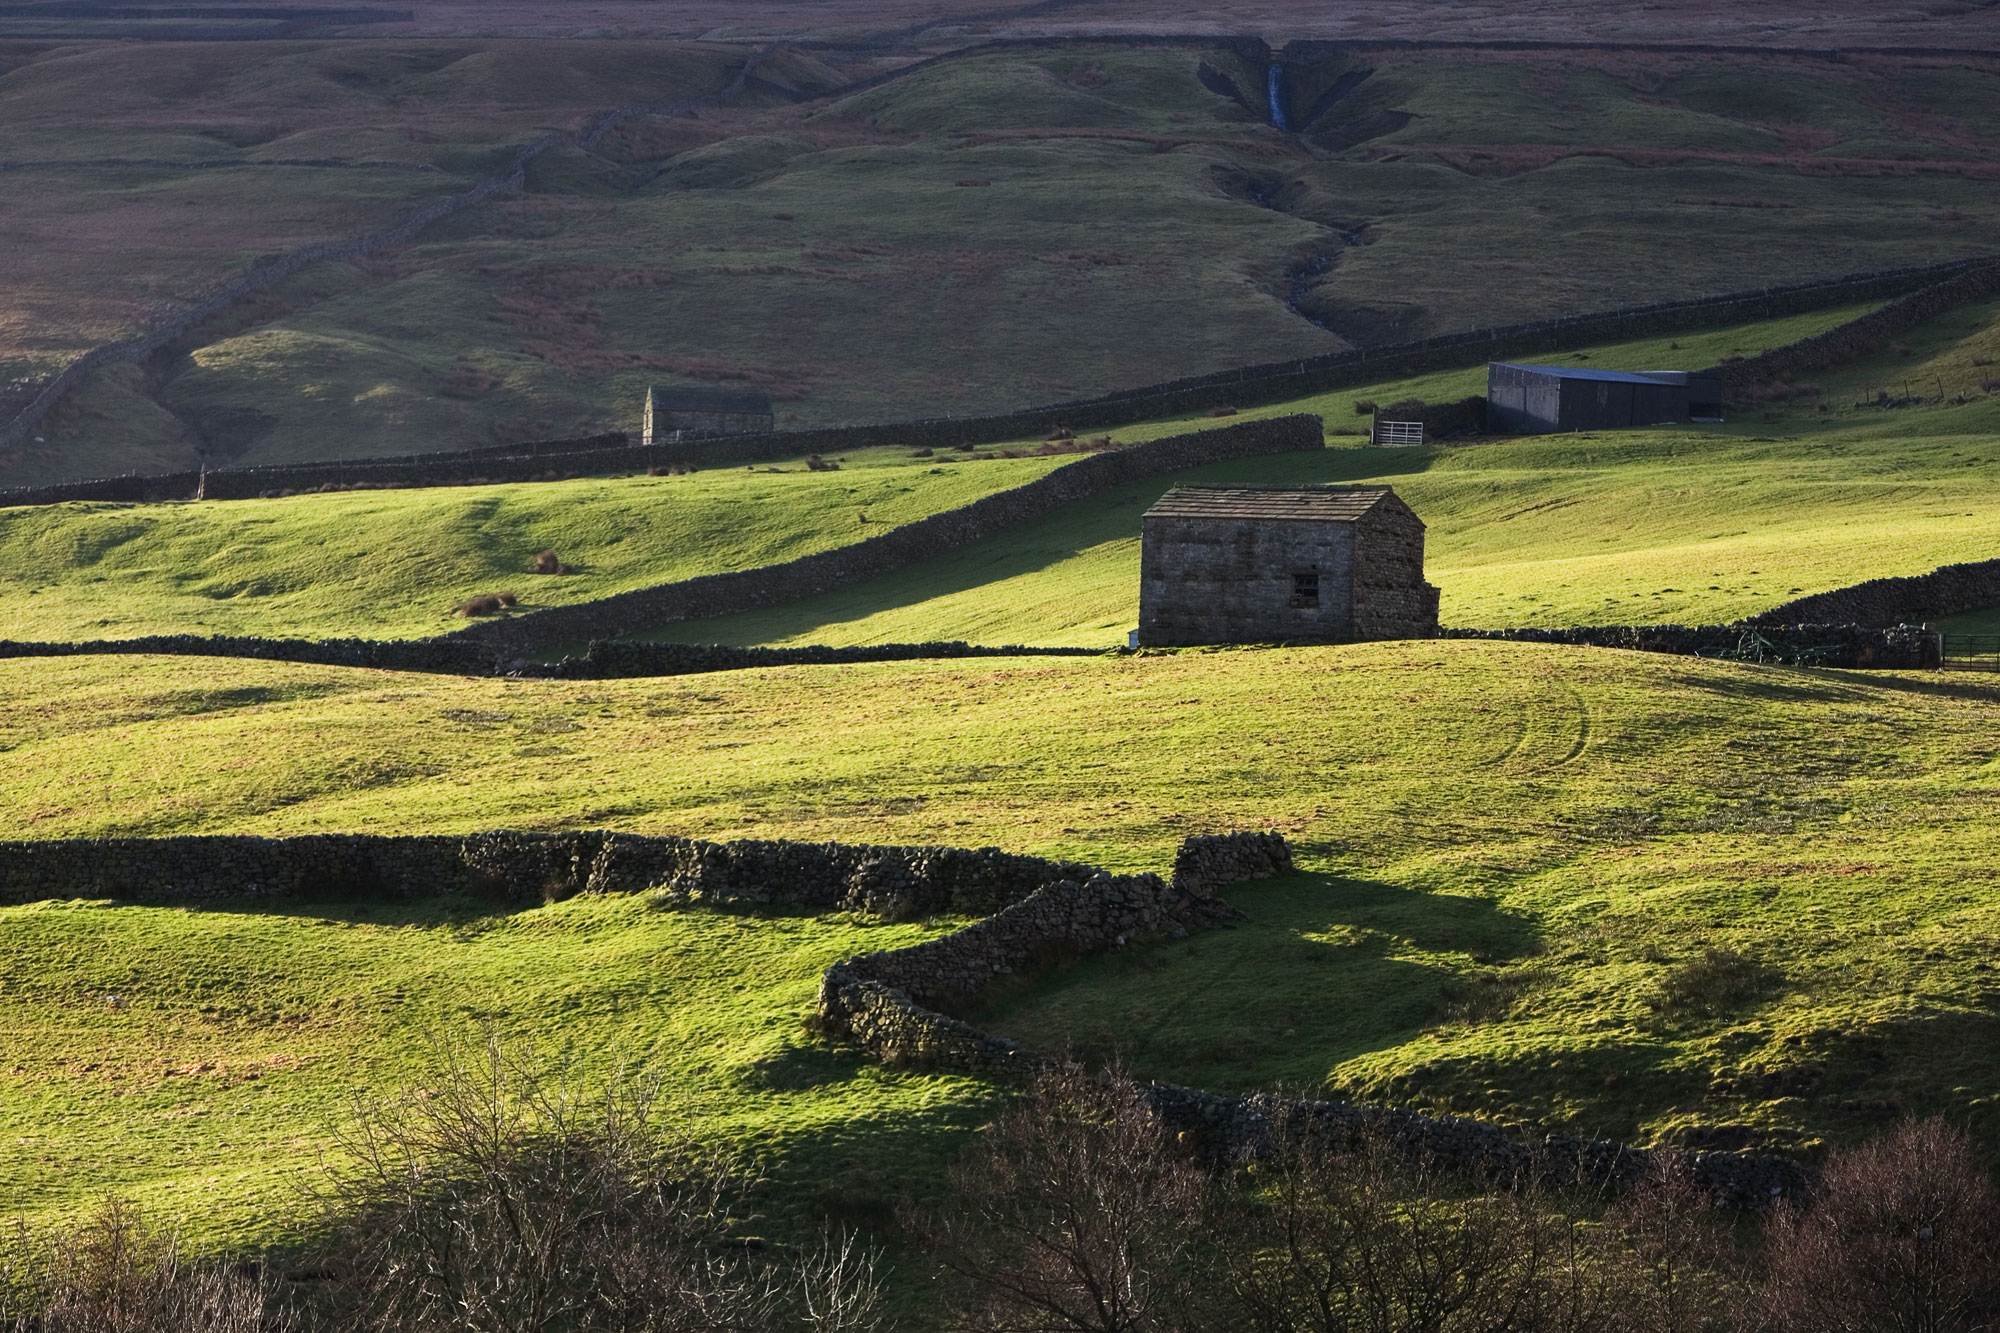 Fields and barn in the Yorkshire Dales National Park